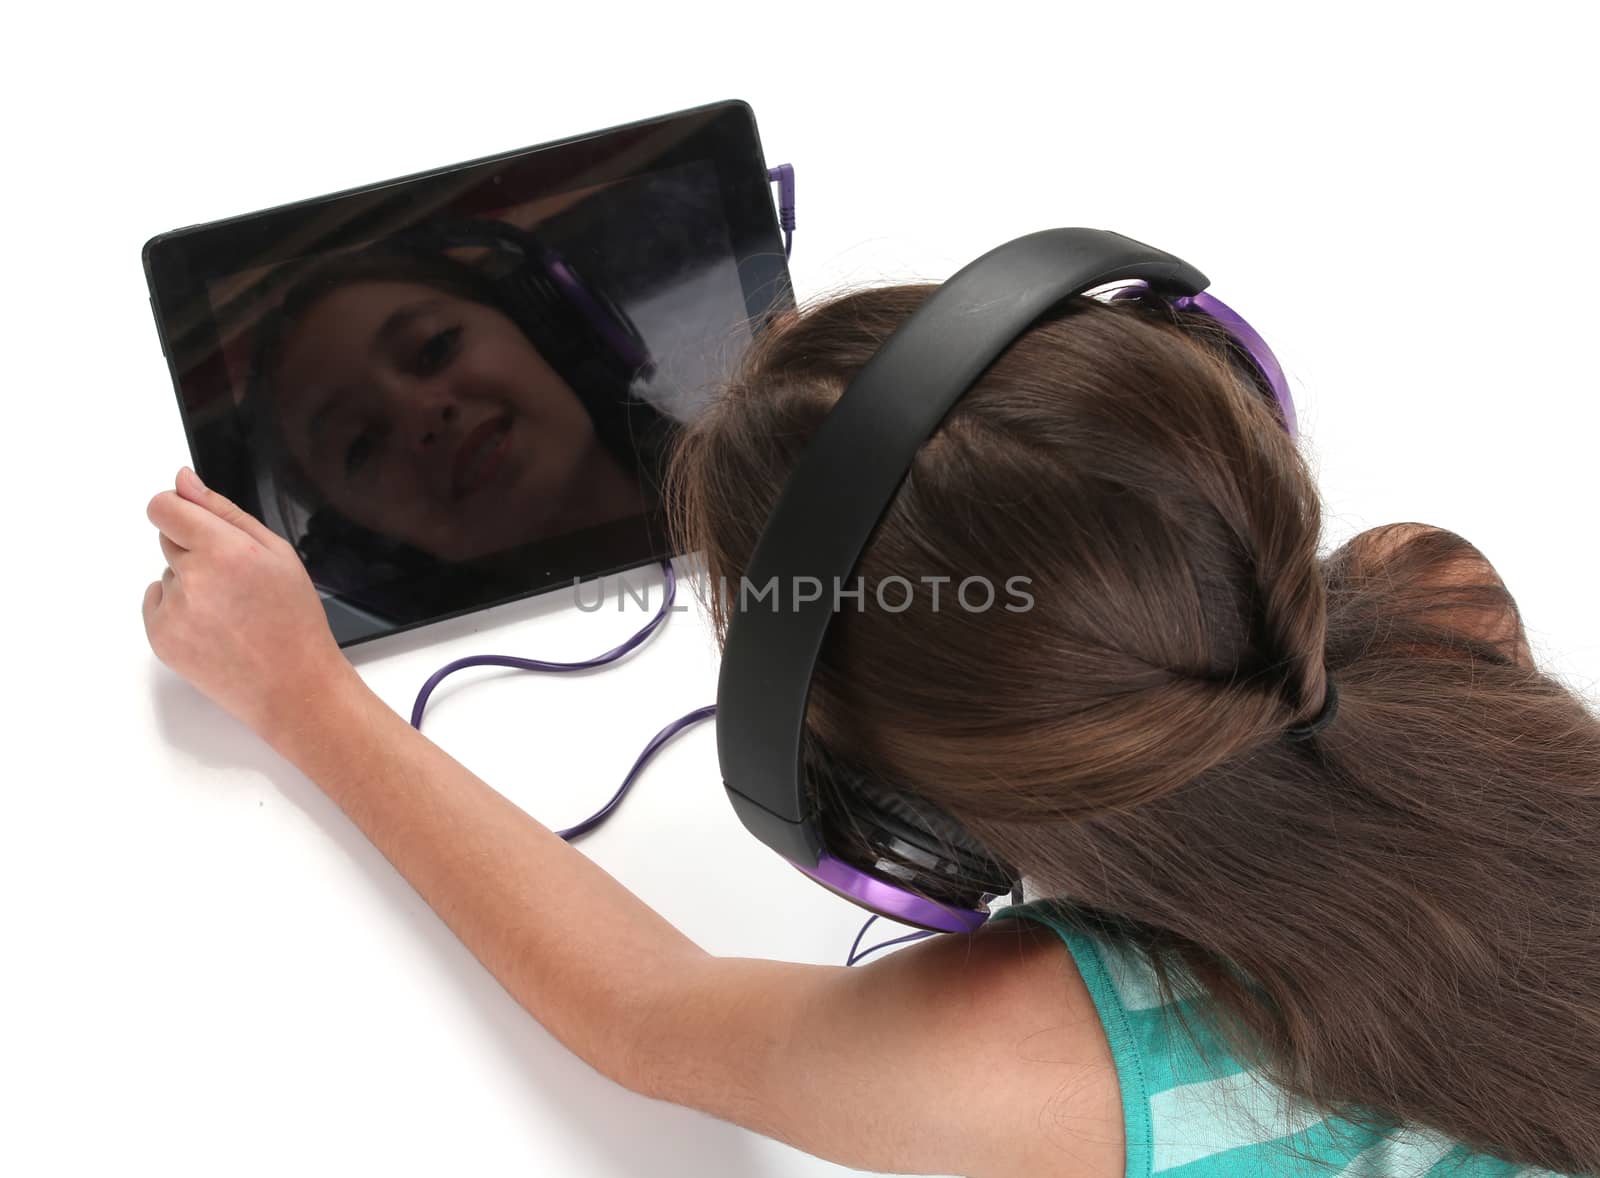 Beautiful pre-teen girl on the floor, usin a tablet computer and headphones by Erdosain